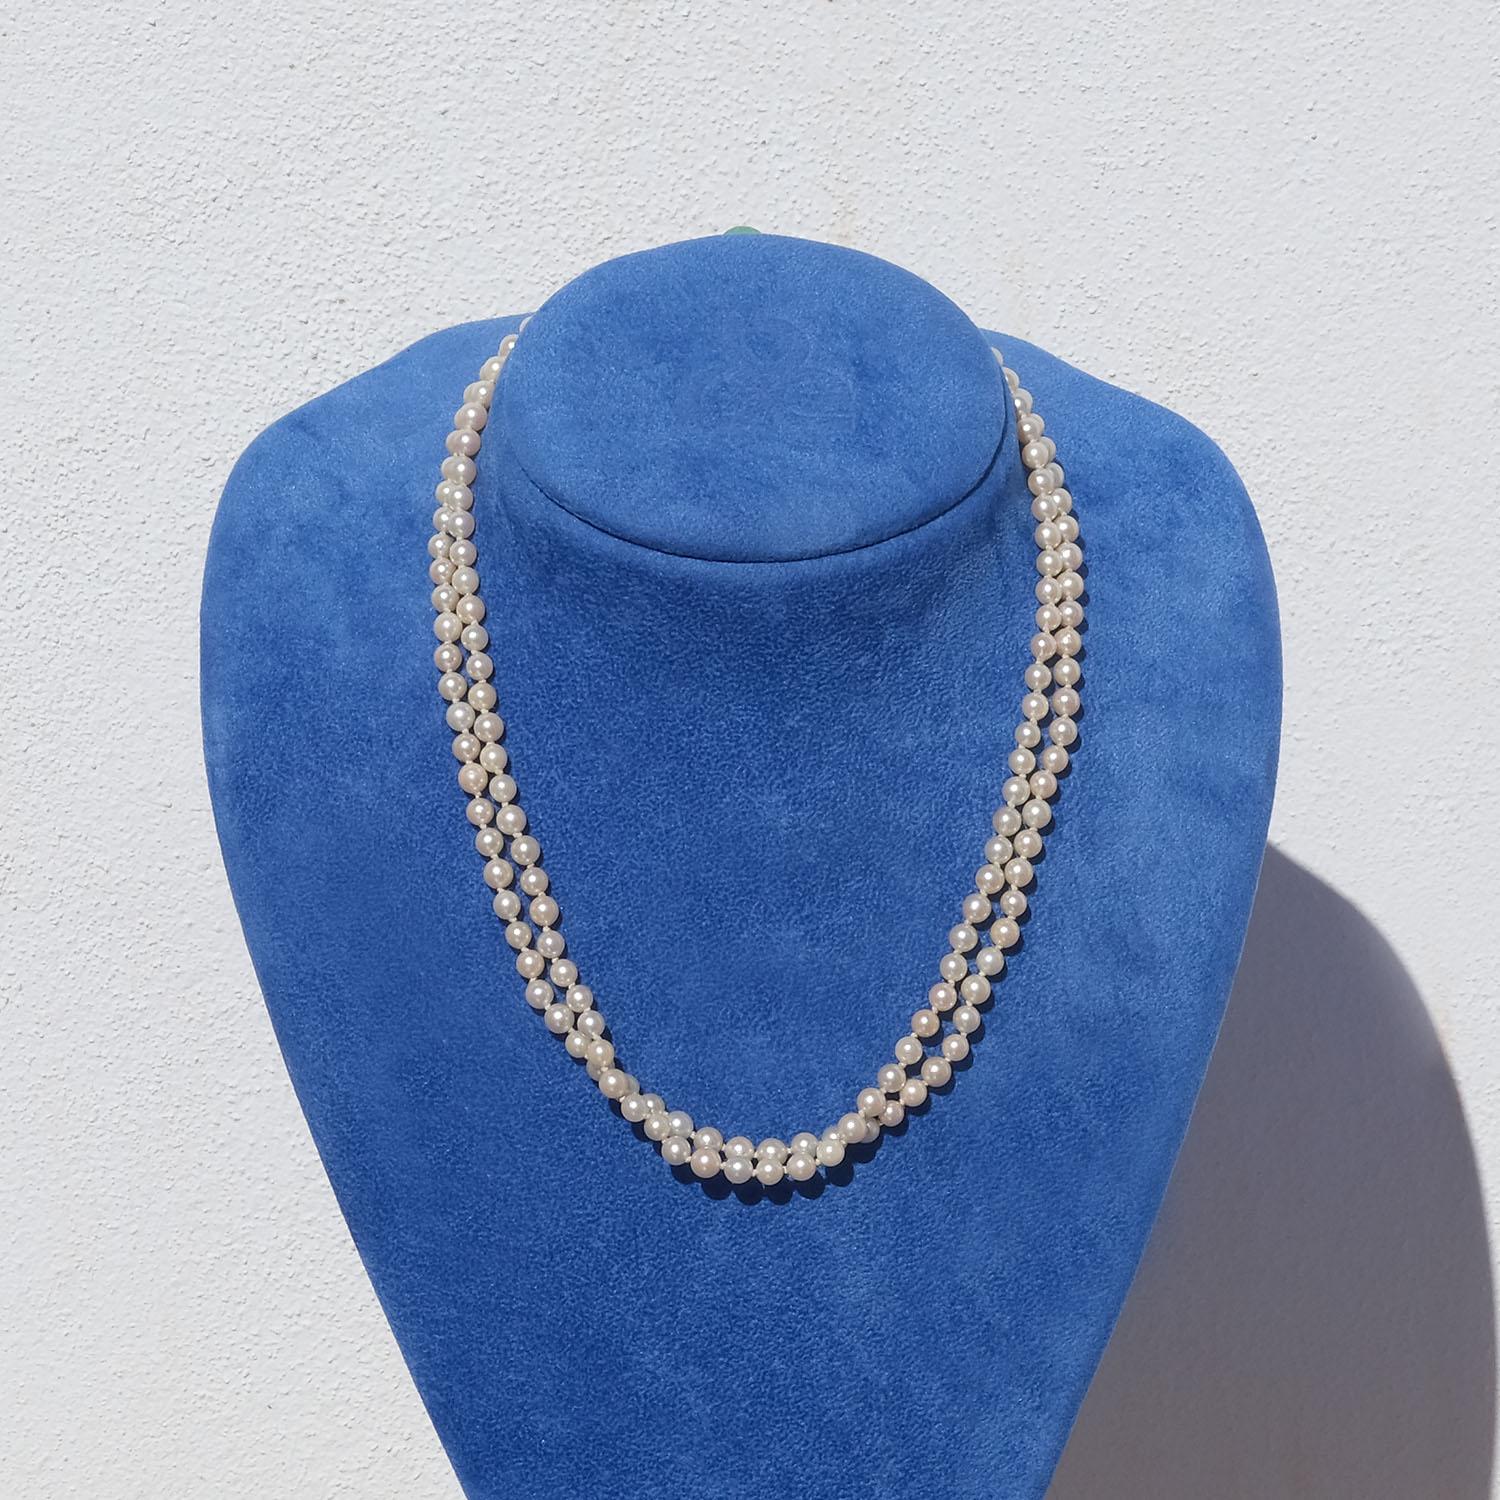 Double Strand Pearl Necklace with a 18k Gold Lock For Sale 5